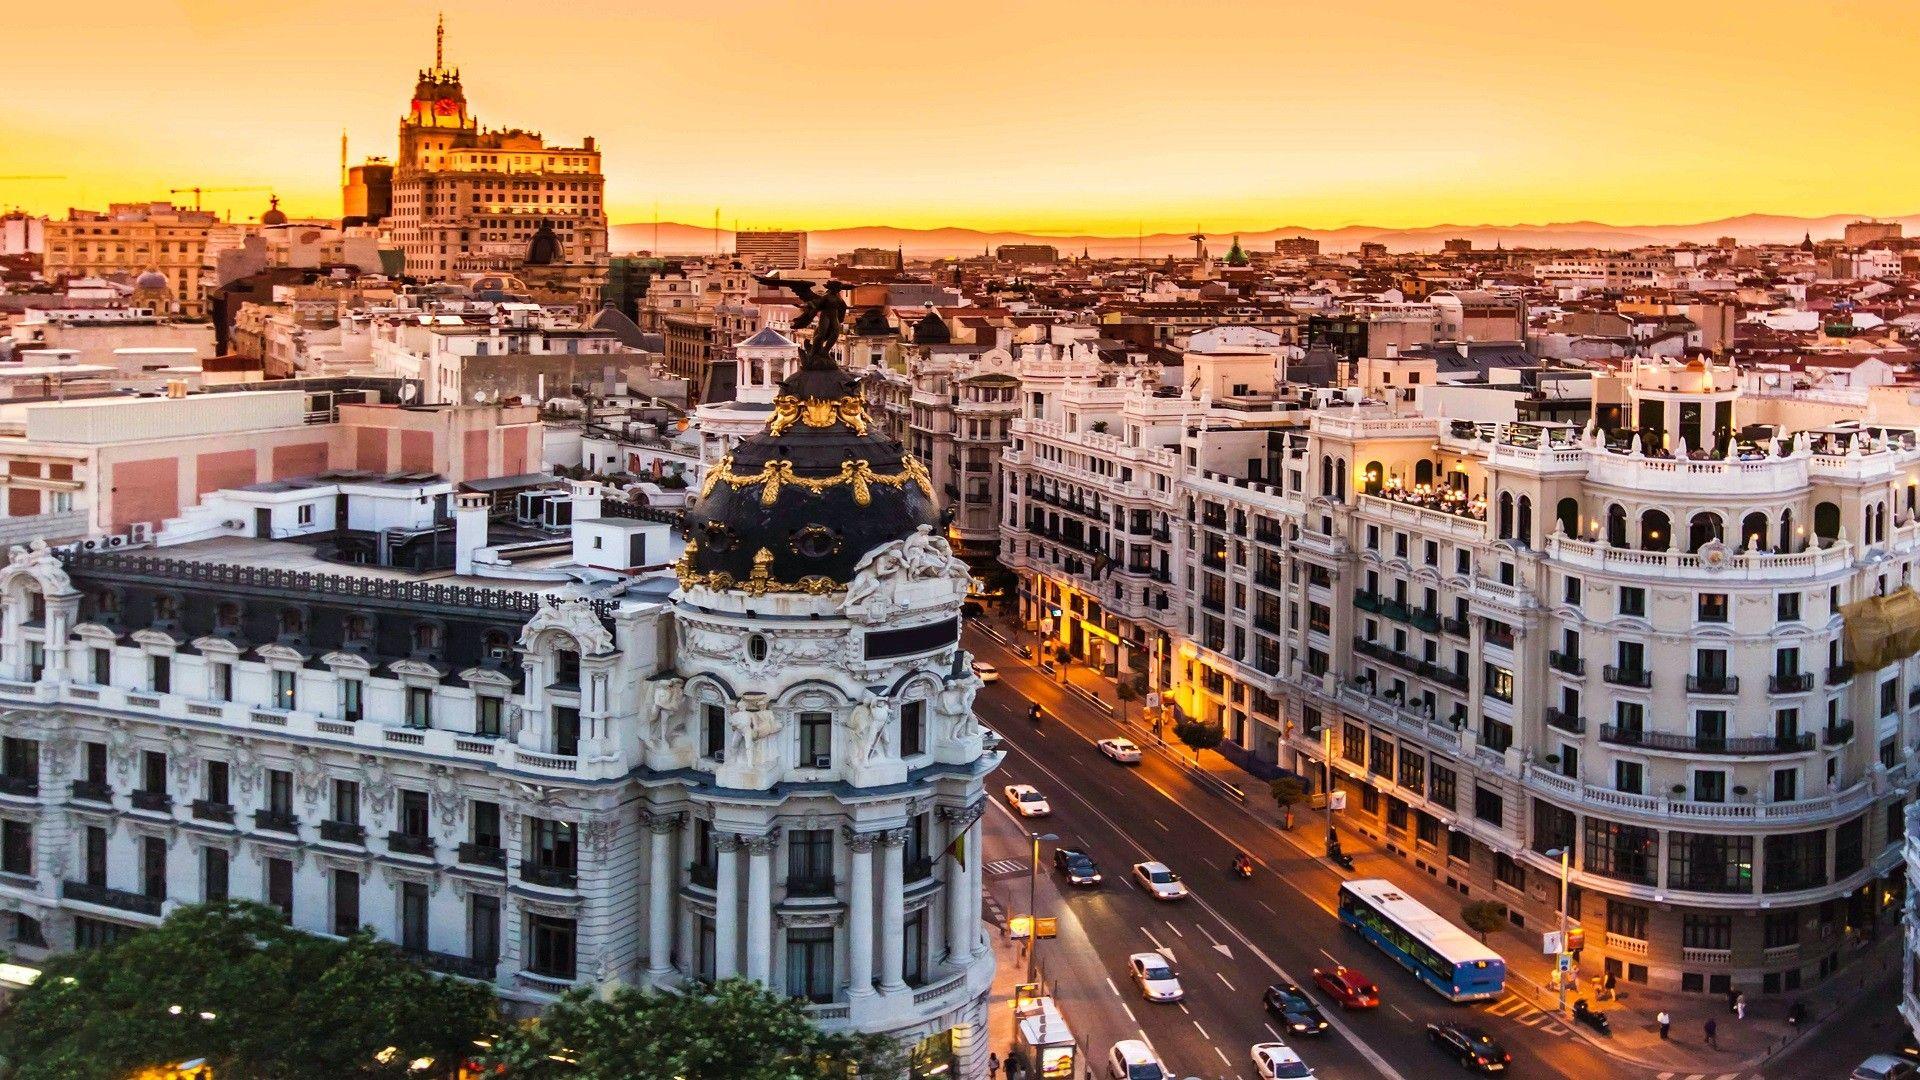 city, Cityscape, Sunset, Road, Car, Architecture, Madrid, Spain